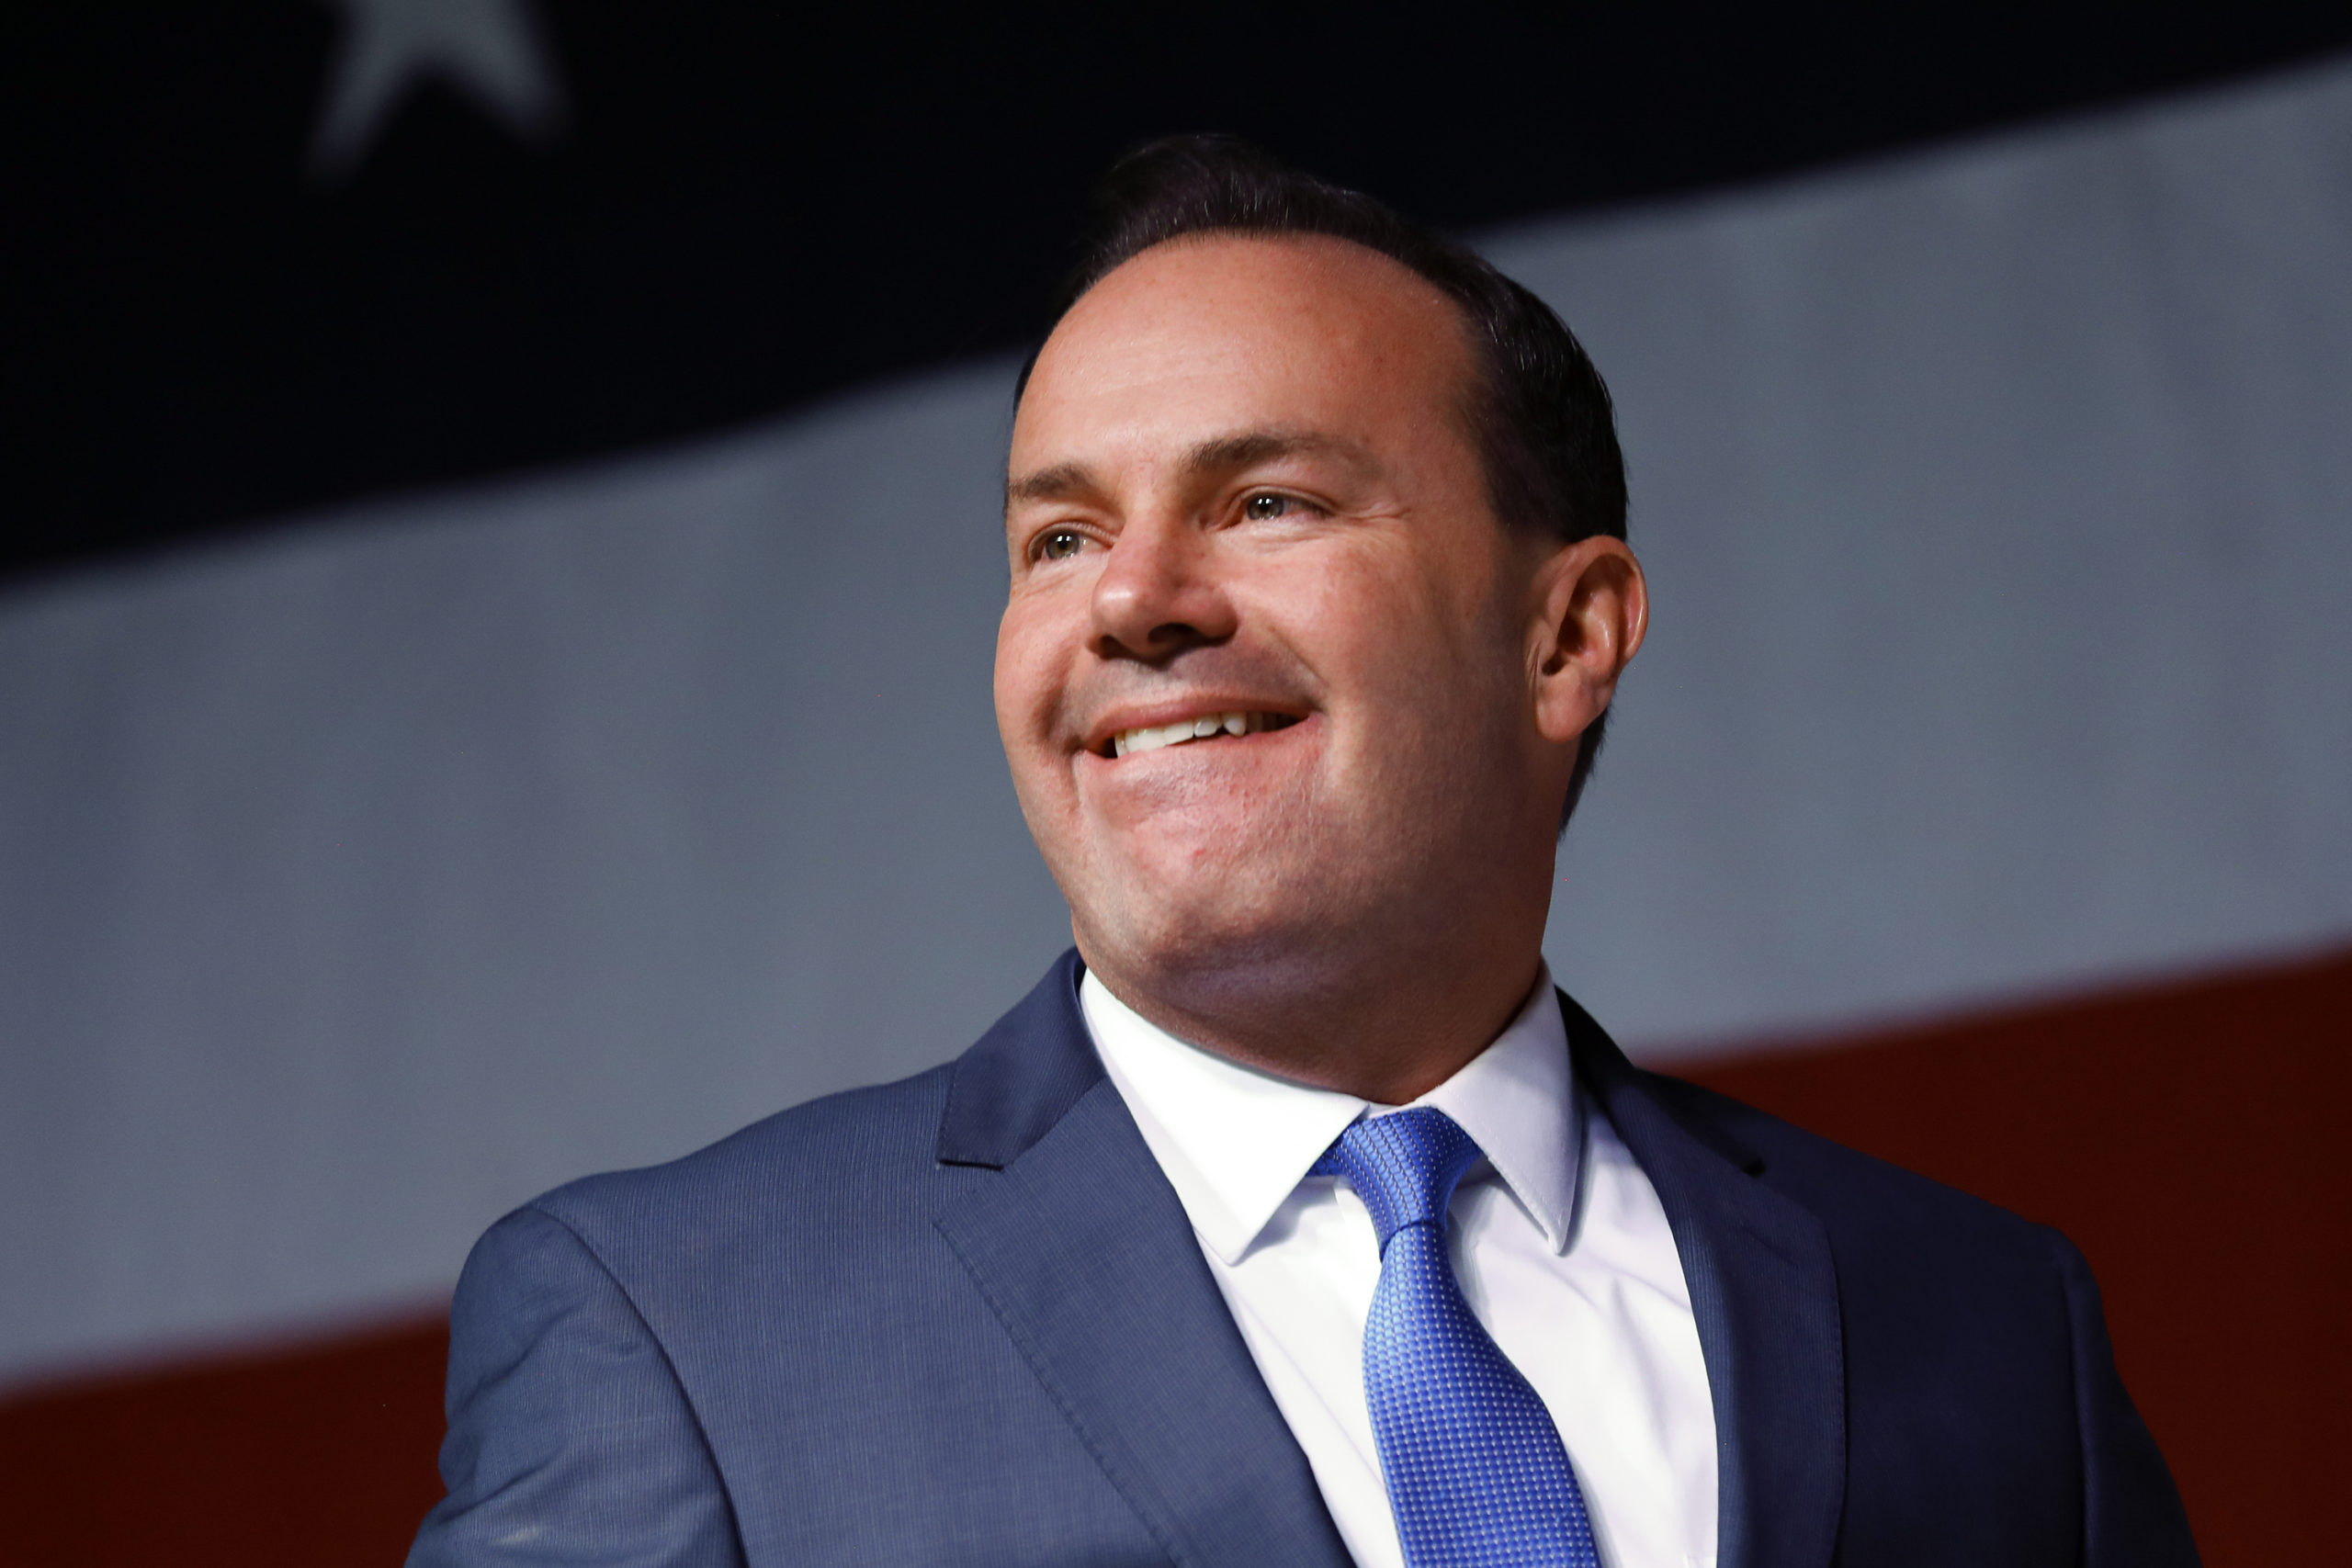 Sen. Mike Lee will go to a primary election, but face no Democrat opponent....